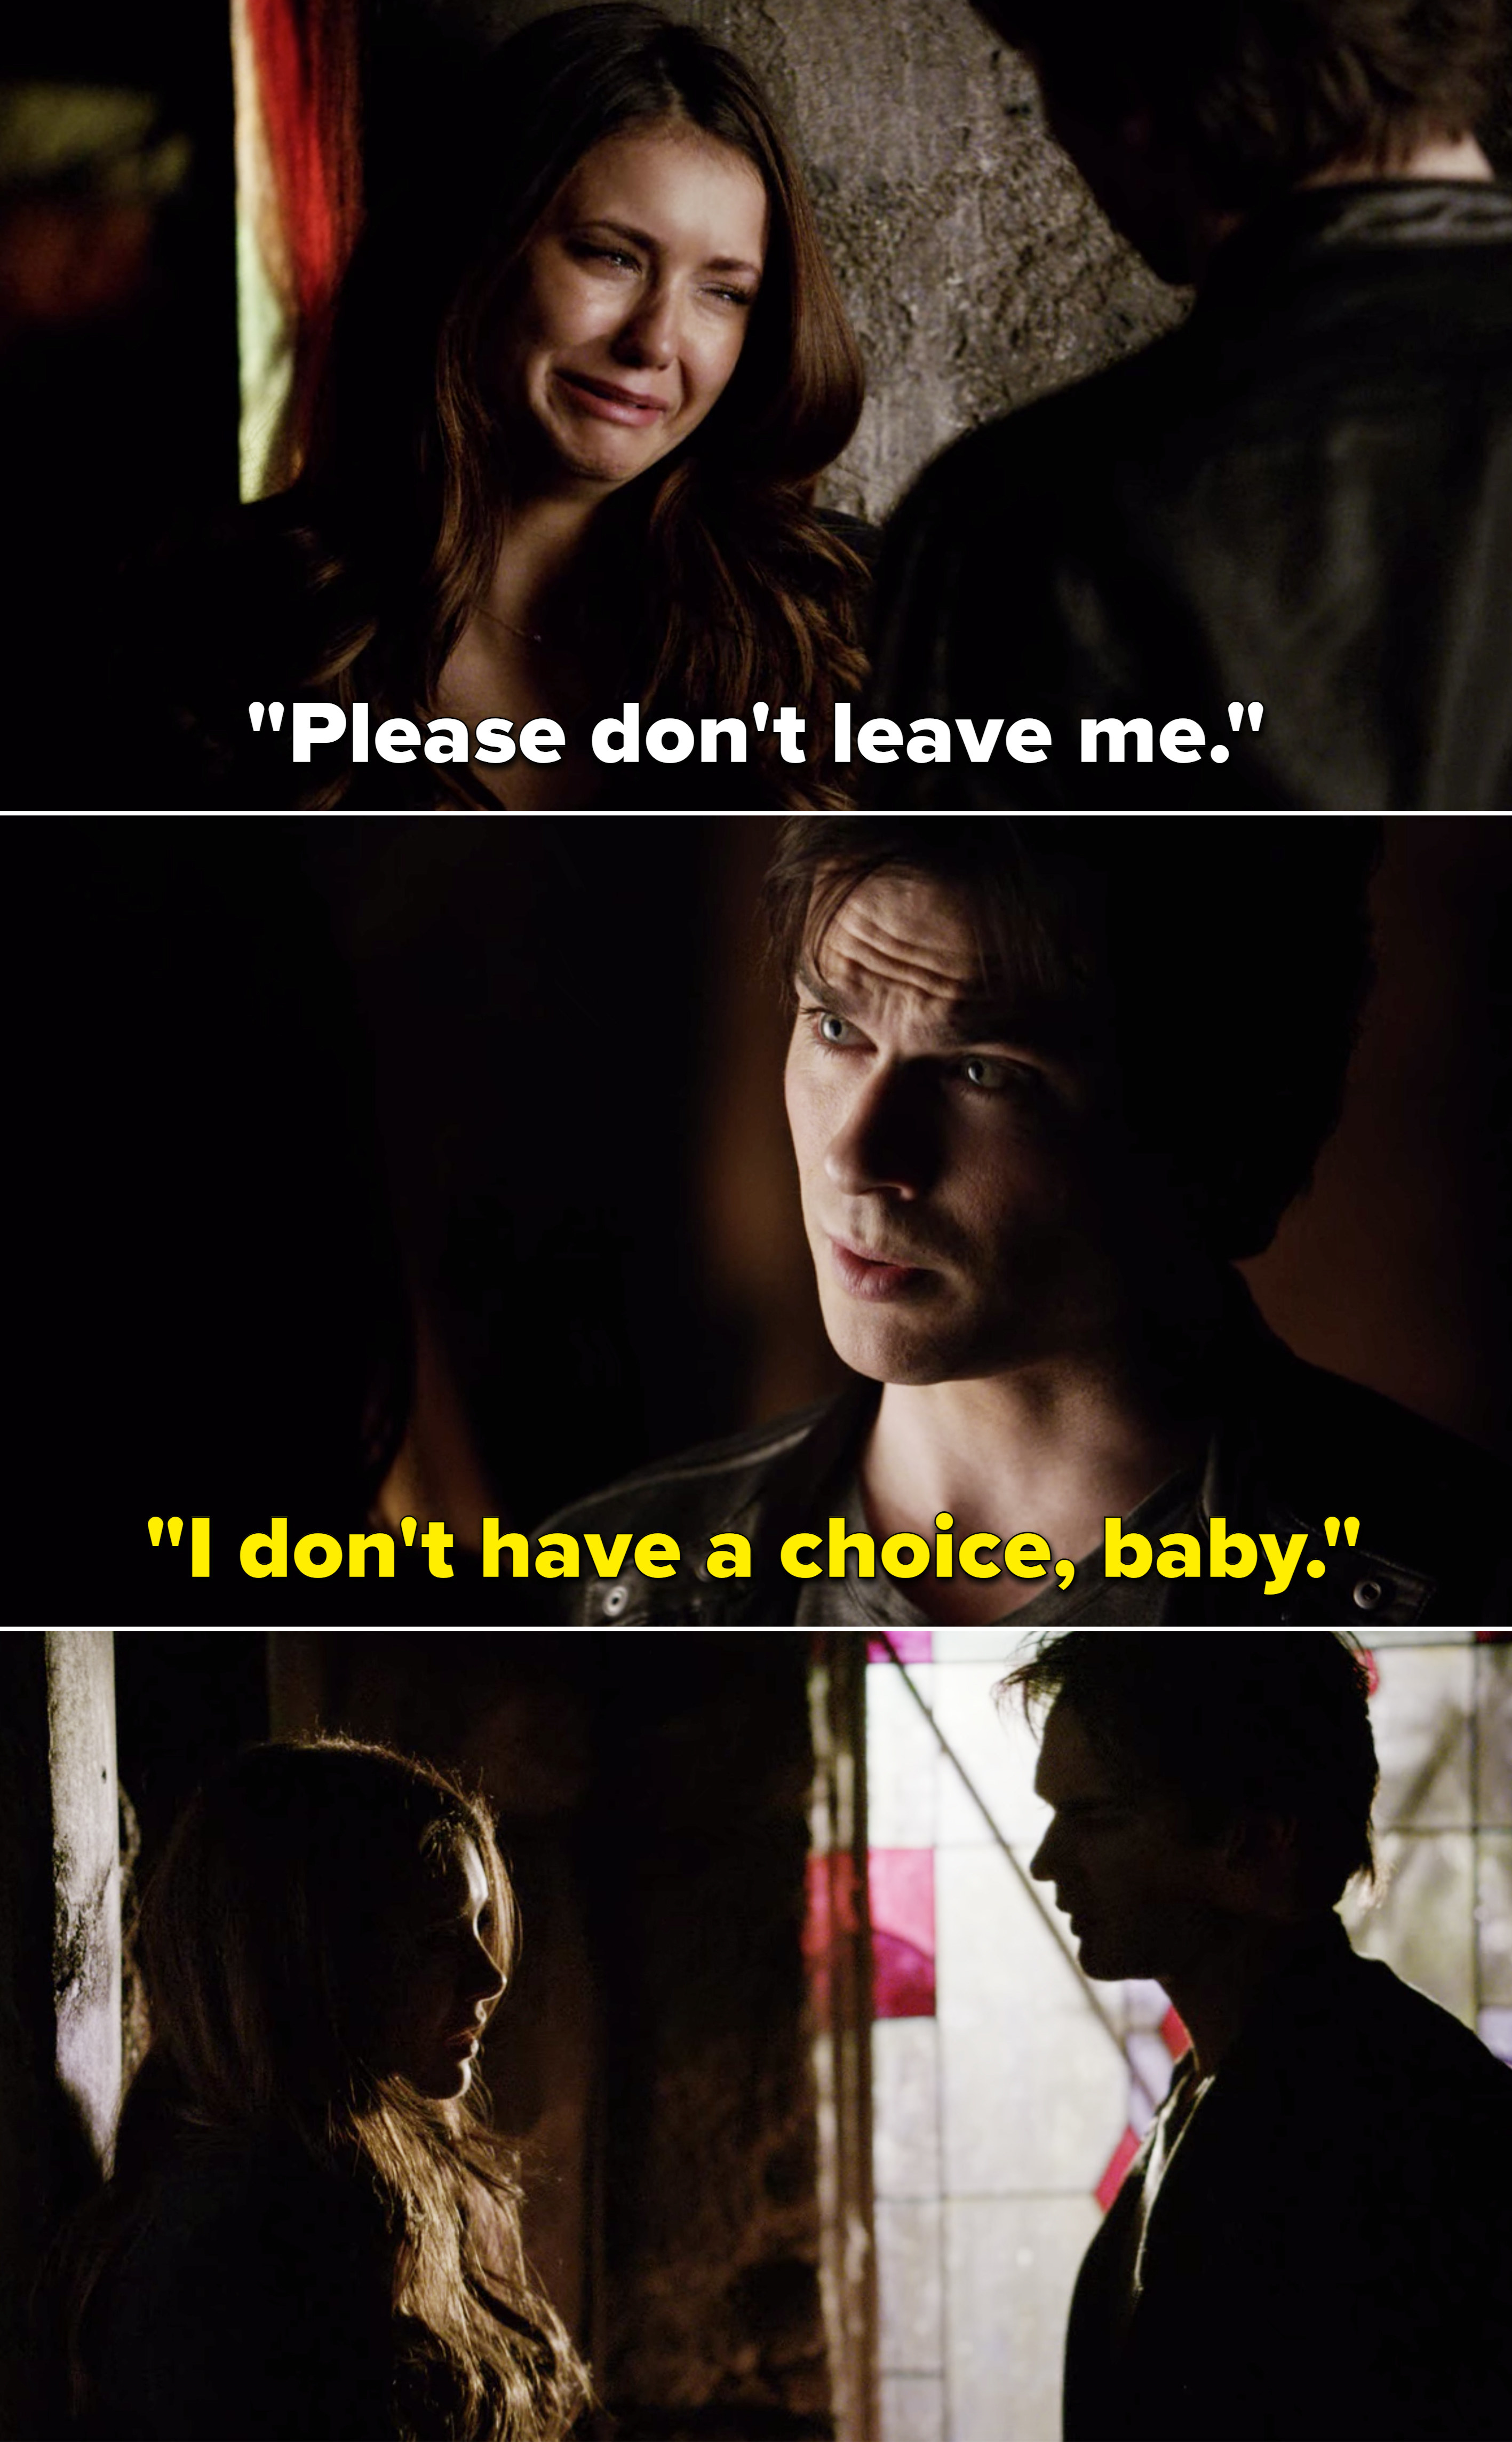 Elena saying, &quot;Please don&#x27;t leave me&quot; and Damon responding, &quot;I don&#x27;t have a choice, baby&quot;